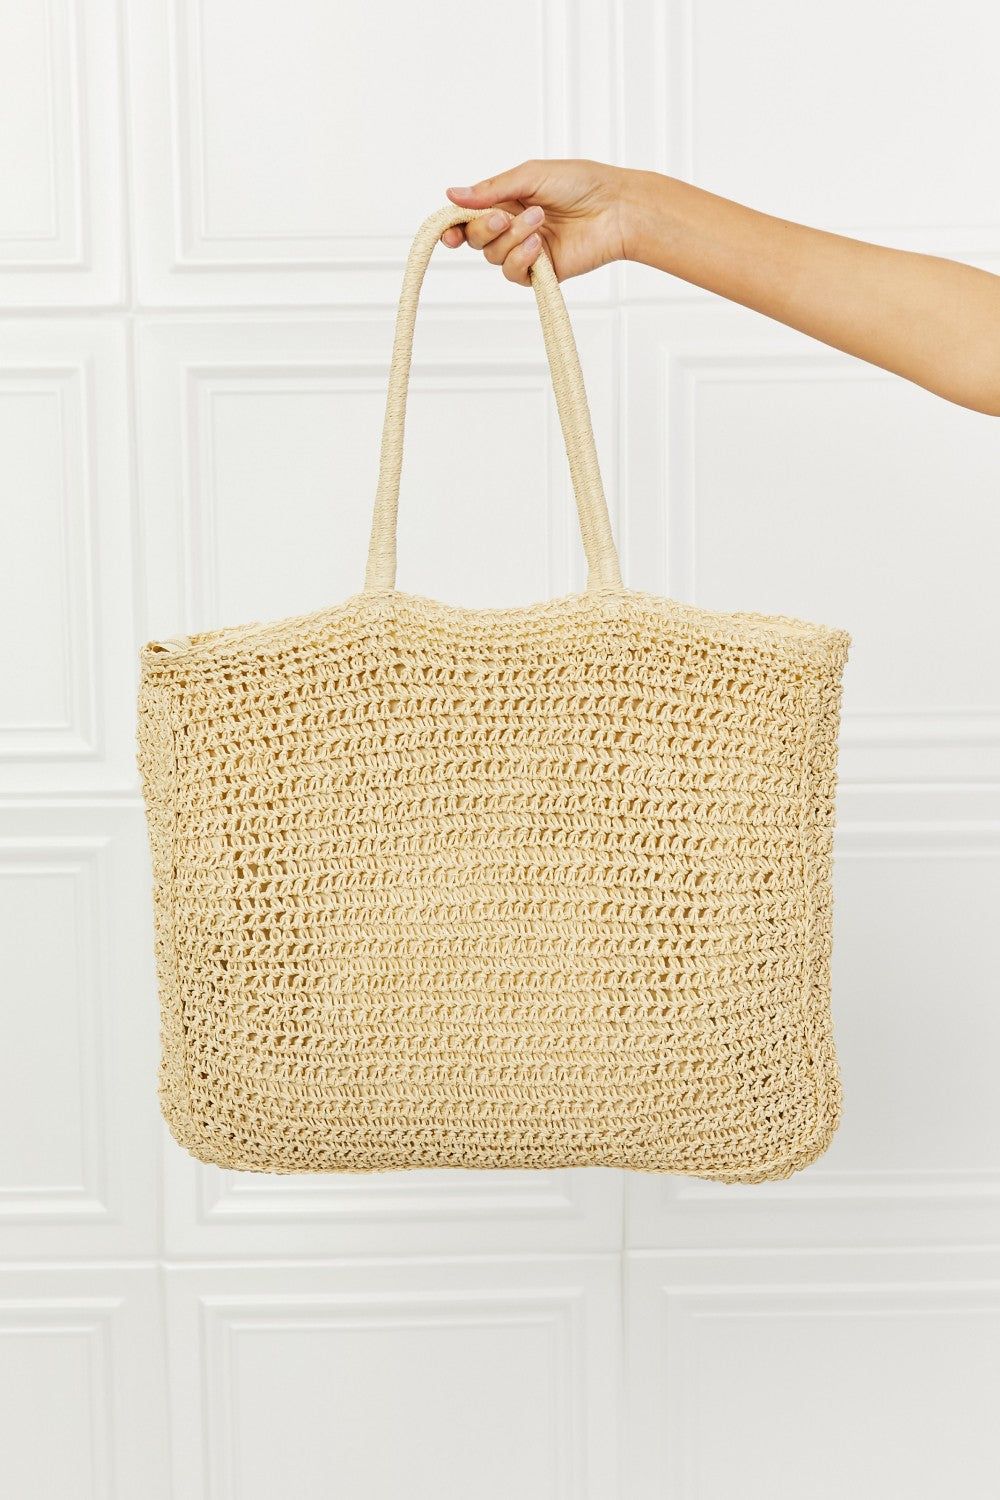 Fame Off The Coast Straw Tote Bag - By Baano